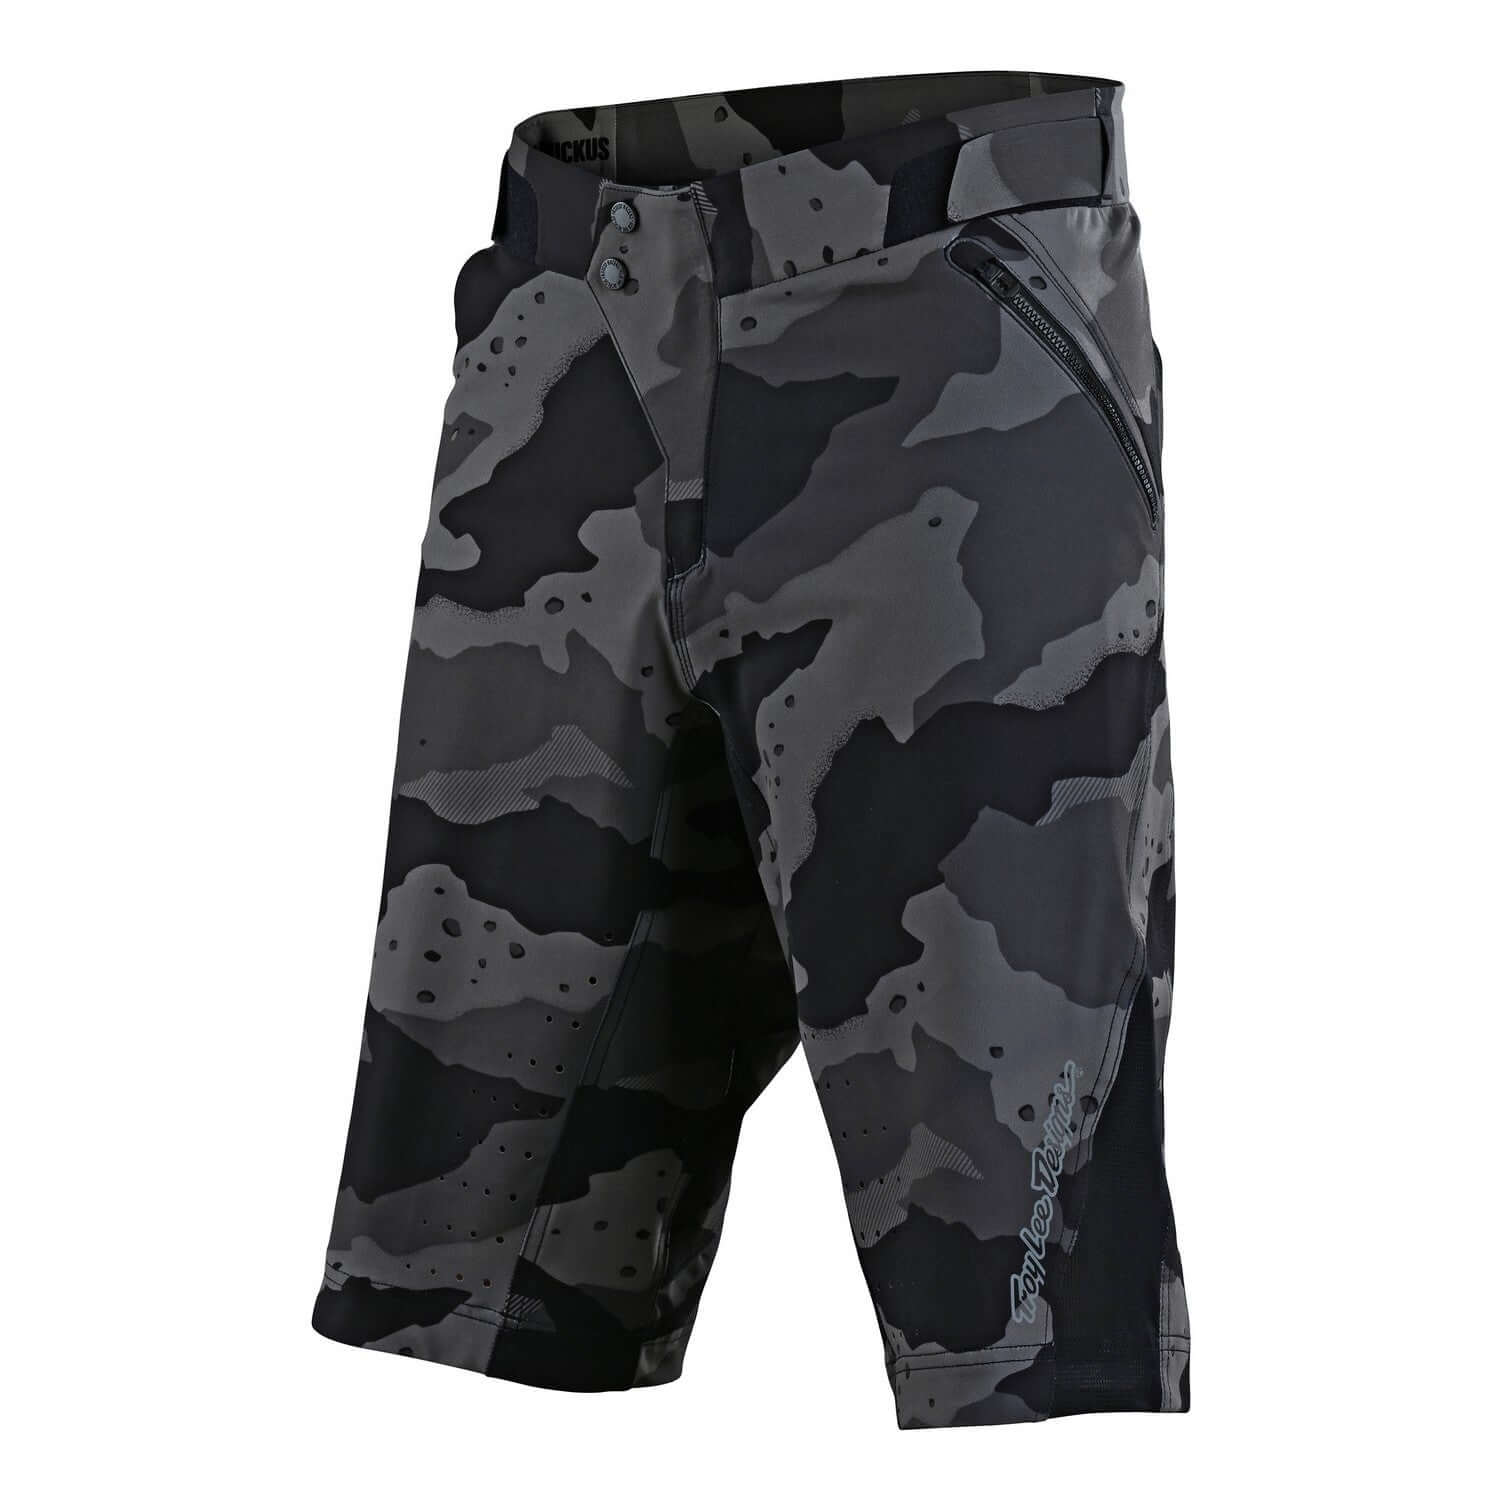 Troy Lee Designs Ruckus Short with Liner Camo Gray Bike Shorts